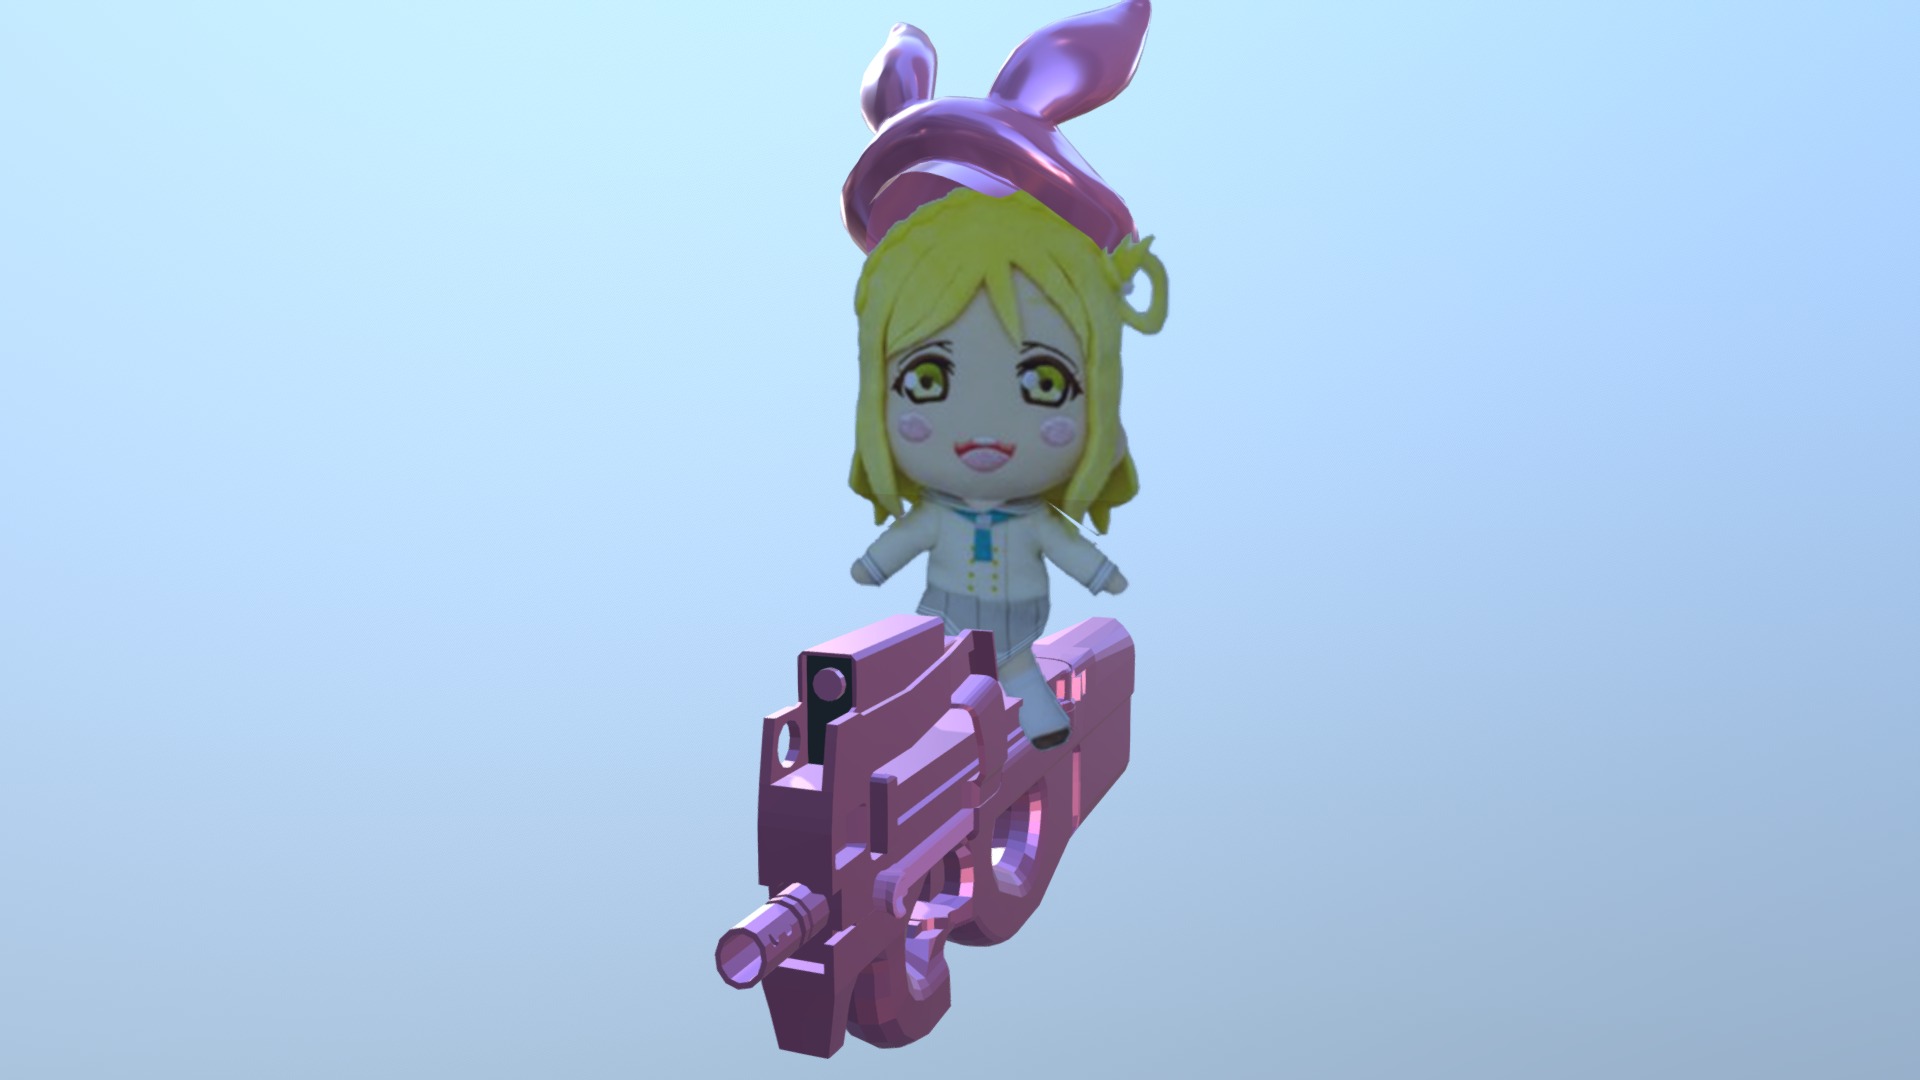 3D model P90 P-chan (SAO Alternative GGO) papercraft test - This is a 3D model of the P90 P-chan (SAO Alternative GGO) papercraft test. The 3D model is about a cartoon character holding a pink toy.